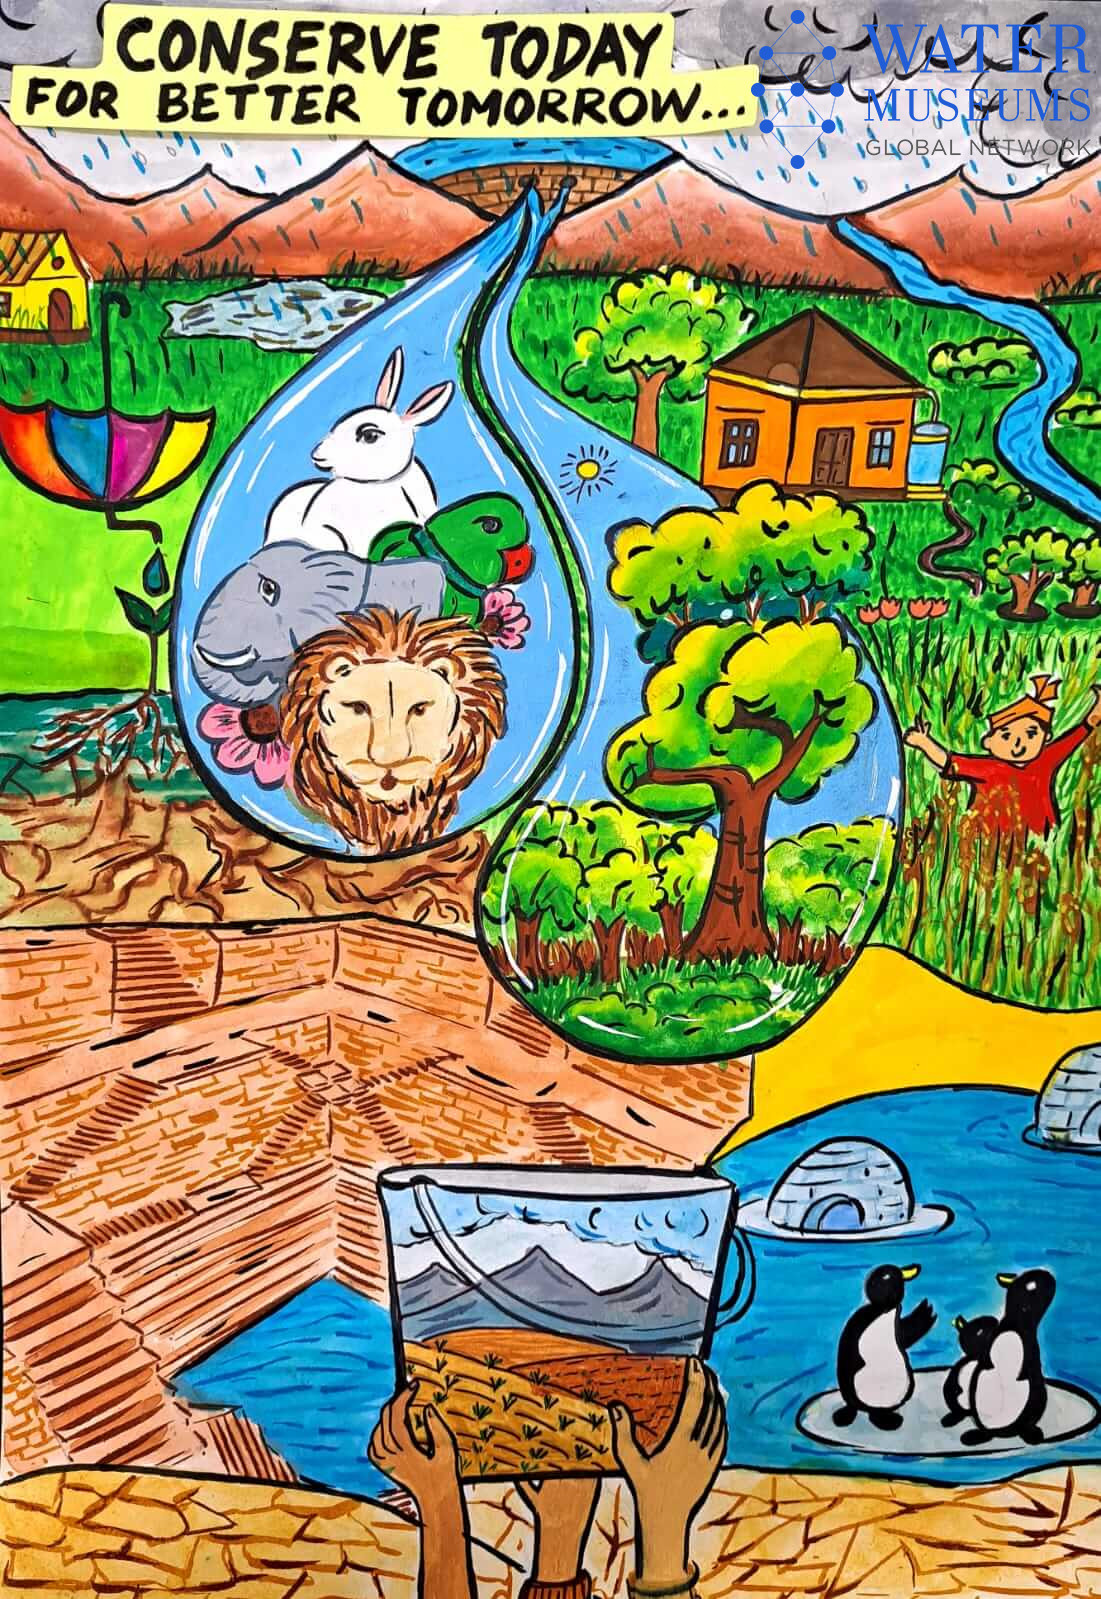 Water conservation | Save water poster drawing, Water conservation poster, Save  water poster